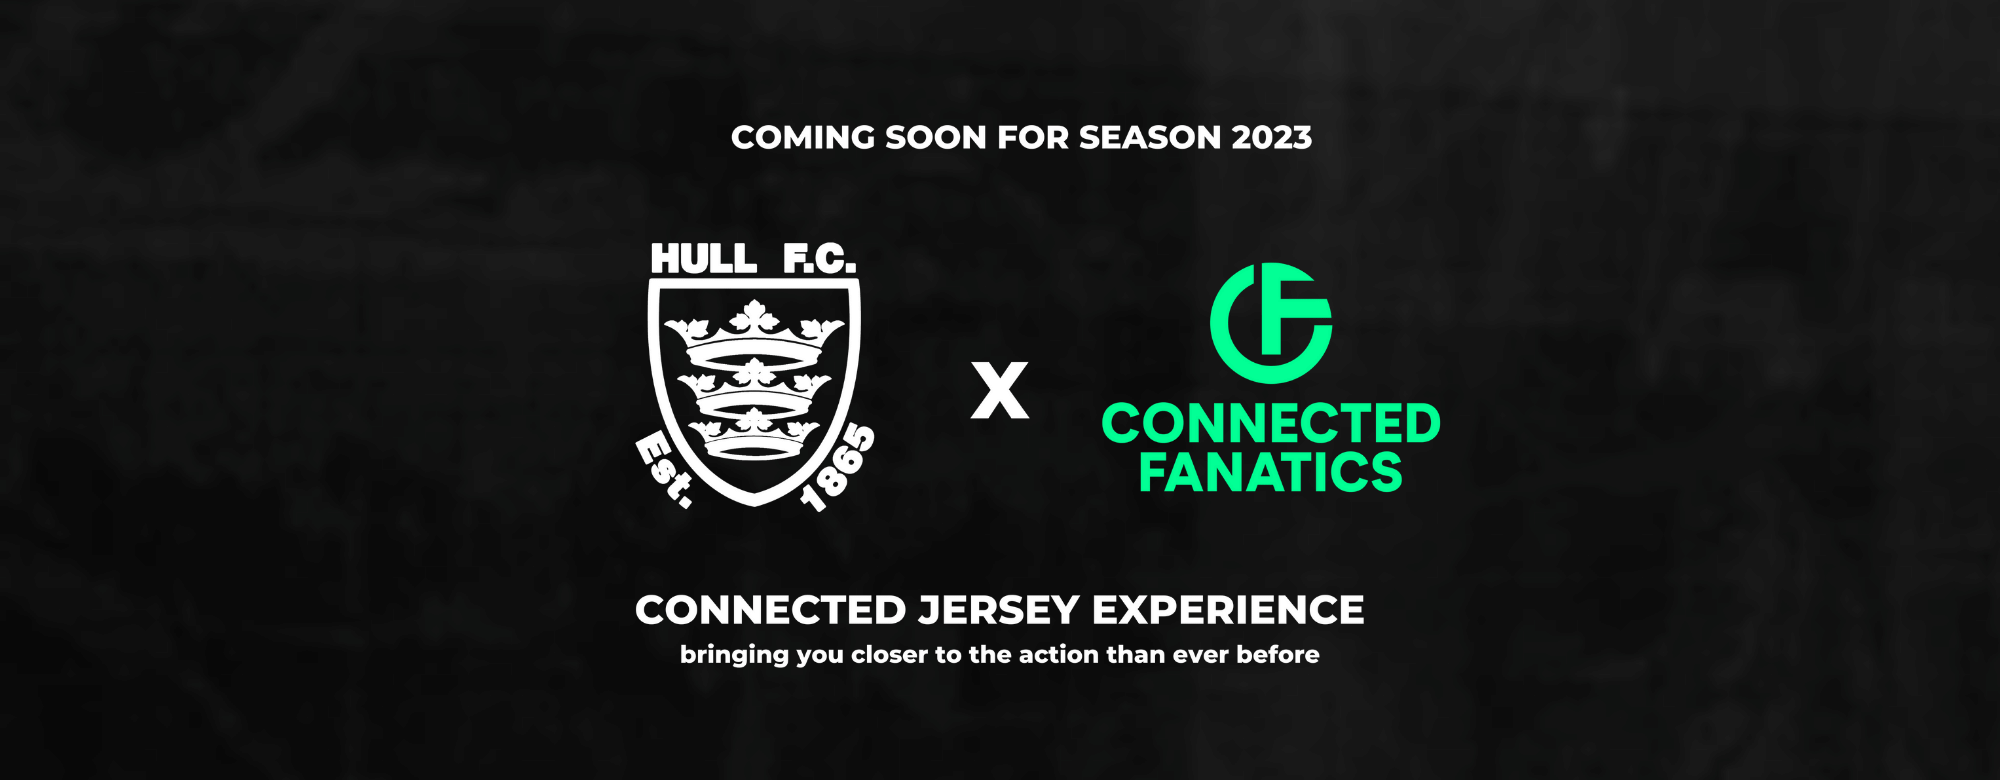 Hull FC Team Up With Connected Fanatics For Unique Interactive Fan Experience